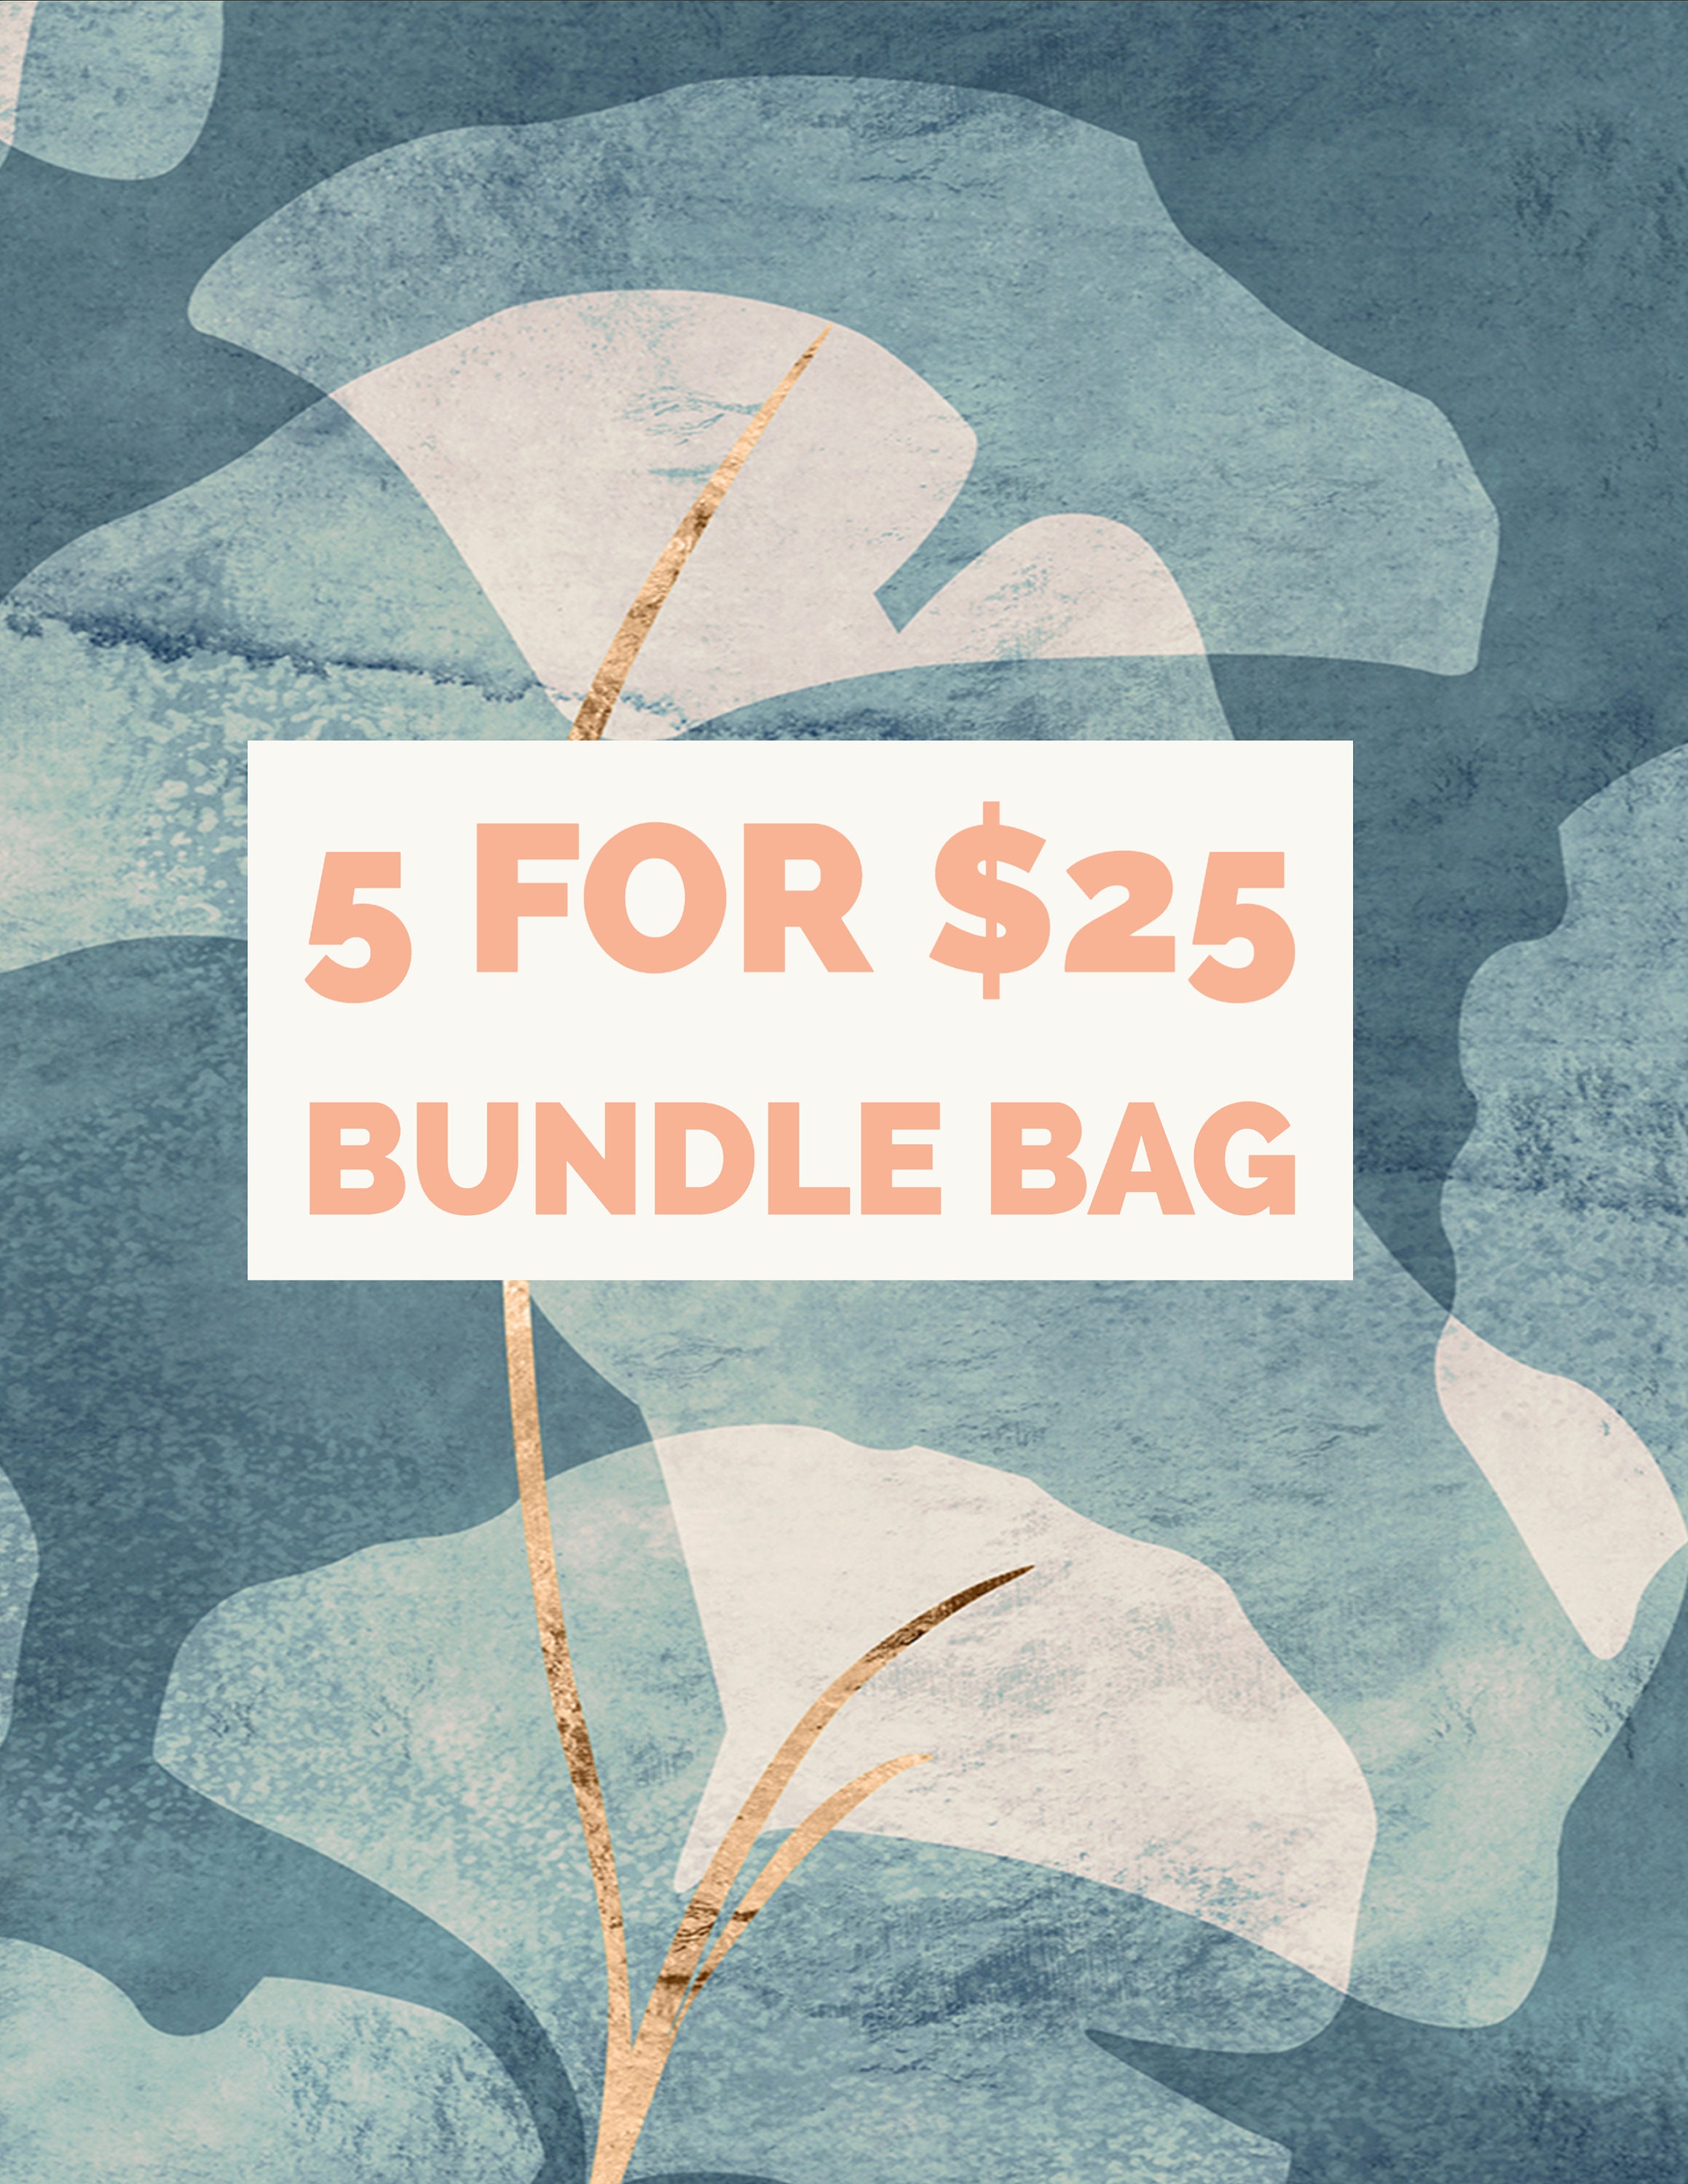 CLEARANCE 5 items for 25 Bundle bag, sale items, one of items, bundled items,  discounted items, wholesale